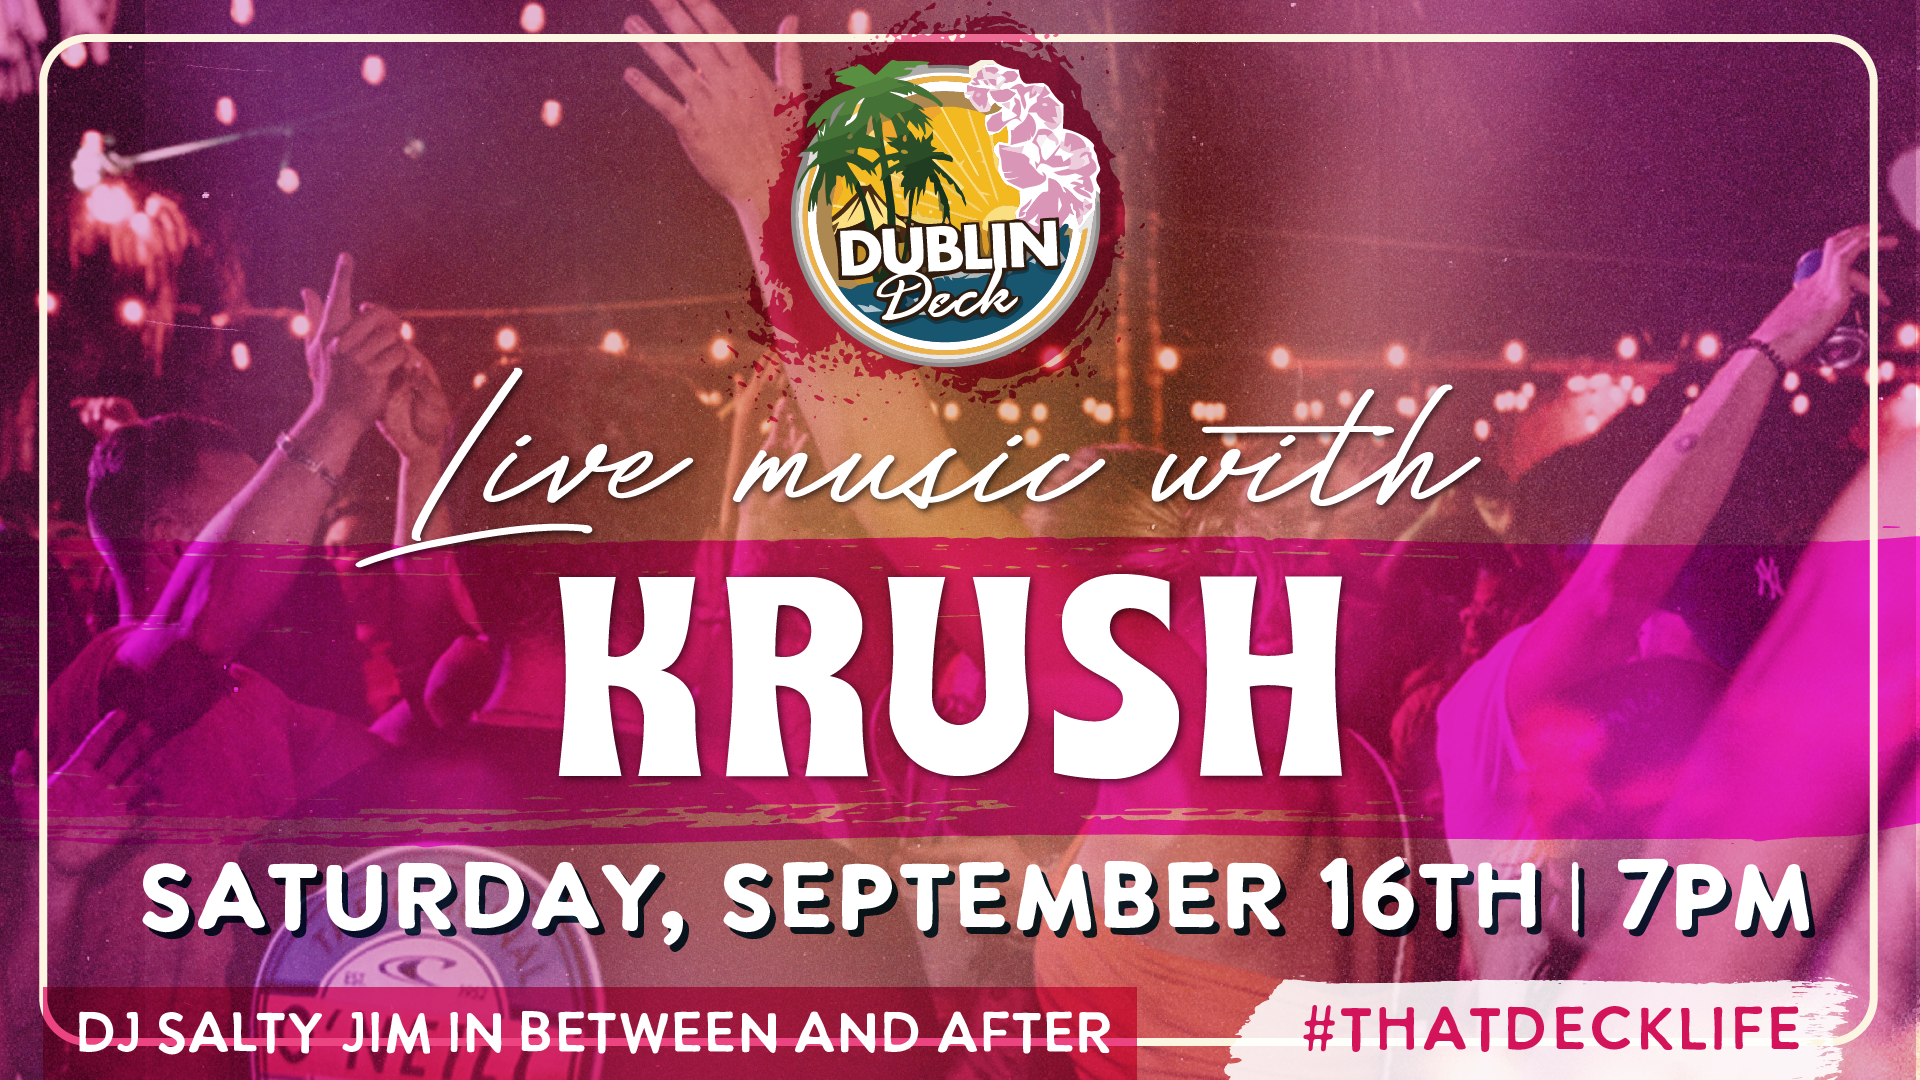 Spend your Saturday night enjoying the sounds of Krush! Music begins at 7PM